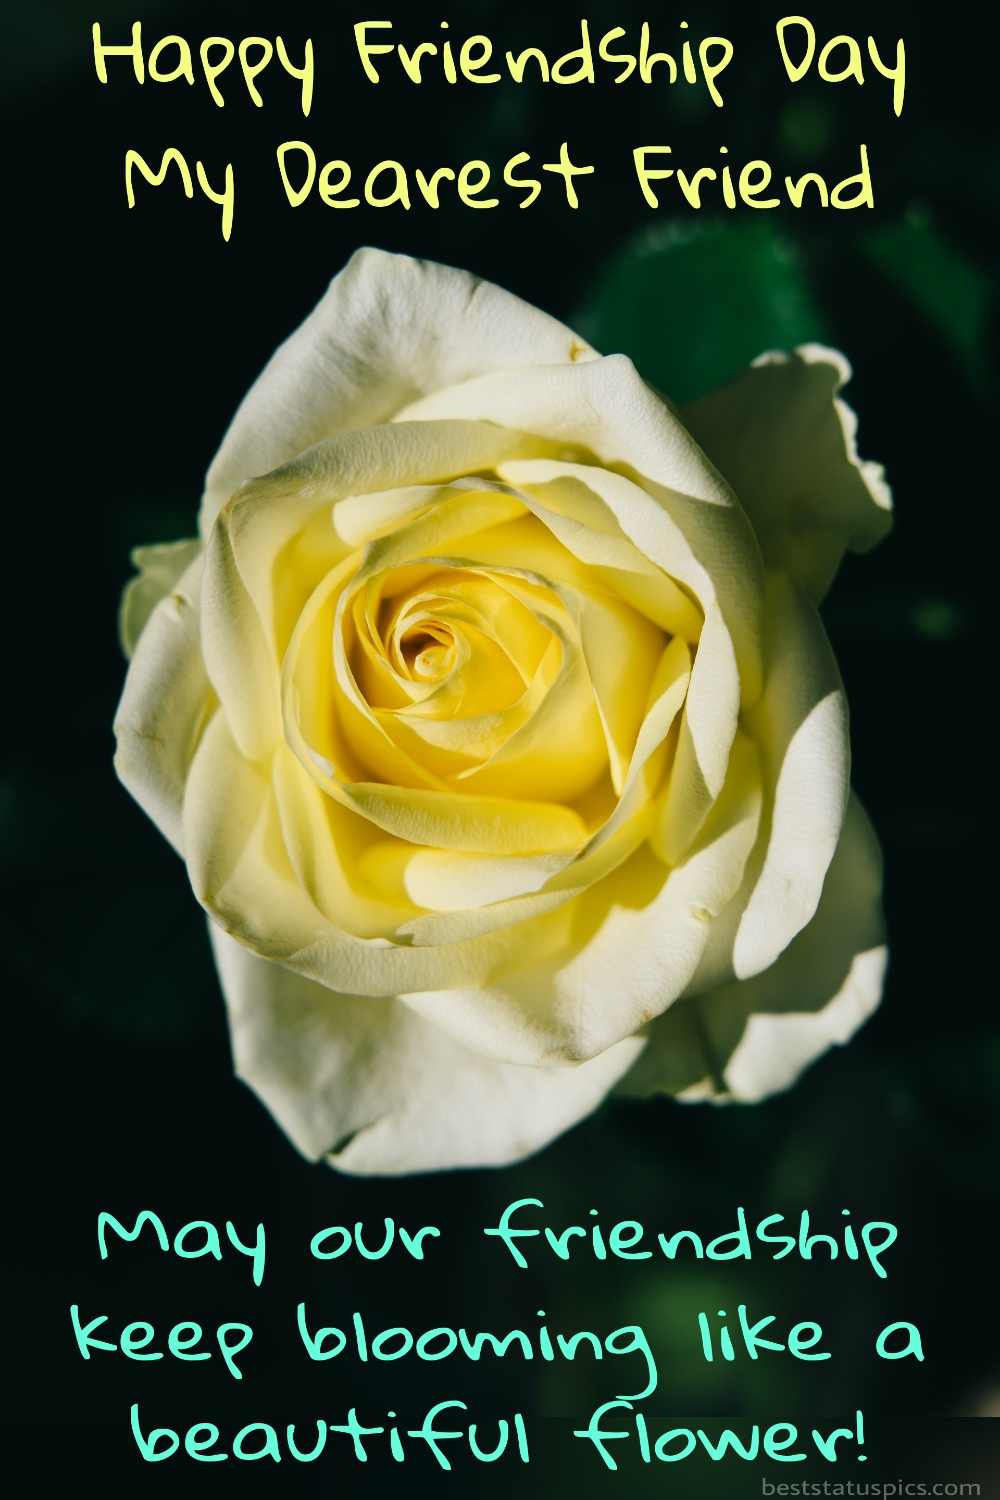 Happy Friendship Day 2022 wishes and quotes with yellow rose pictures